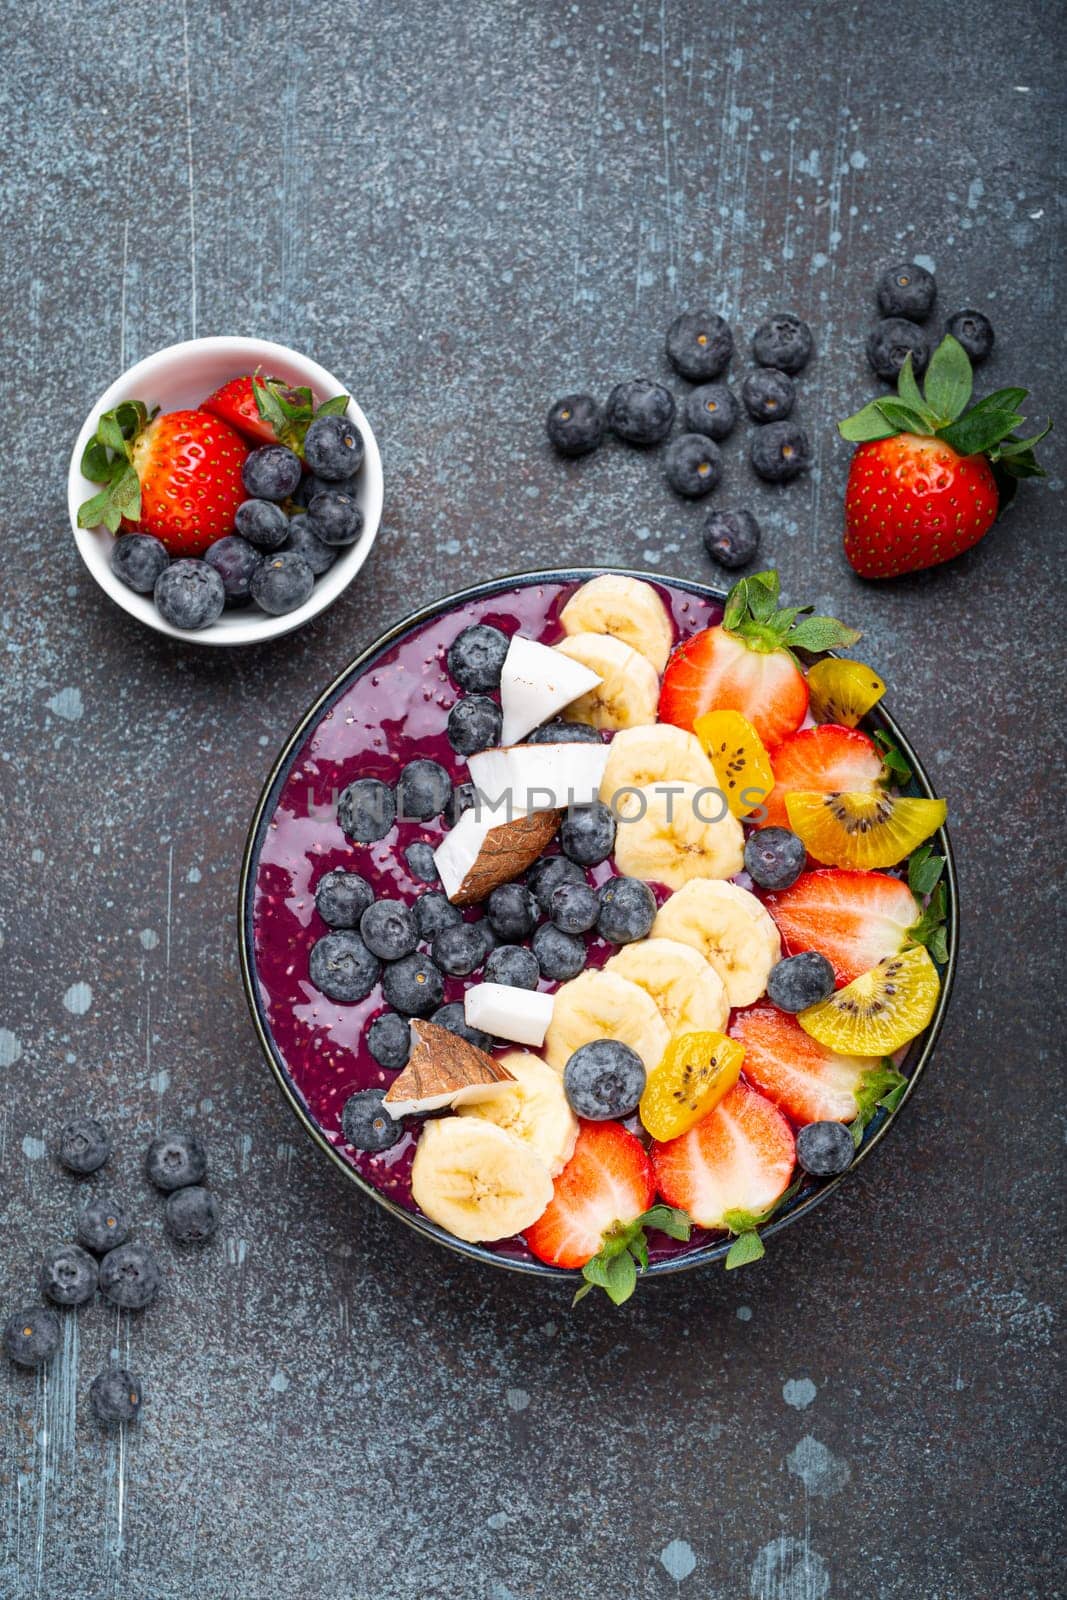 Healthy summer acai smoothie bowl with chia seeds, fresh banana, strawberry, blueberry, cocos, kiwi top view, rustic concrete background with spoon by its_al_dente